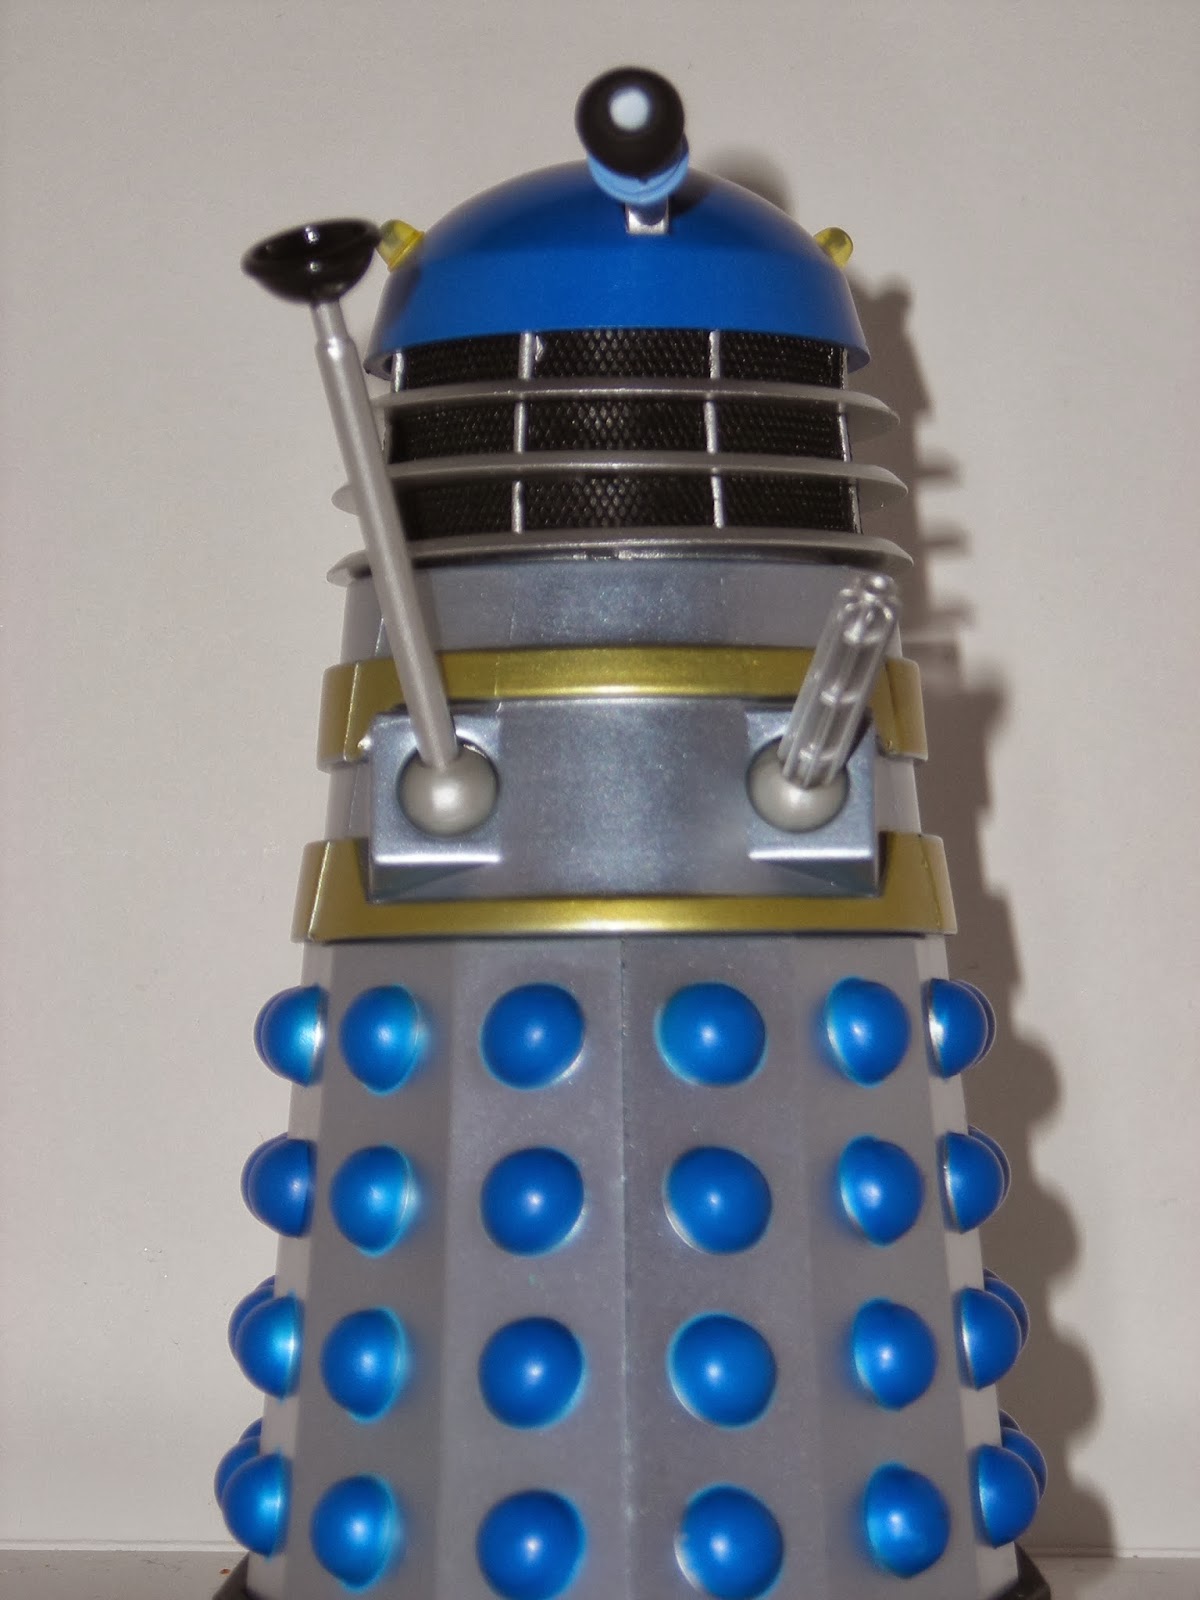 "If you squint I can be a movie Dalek"